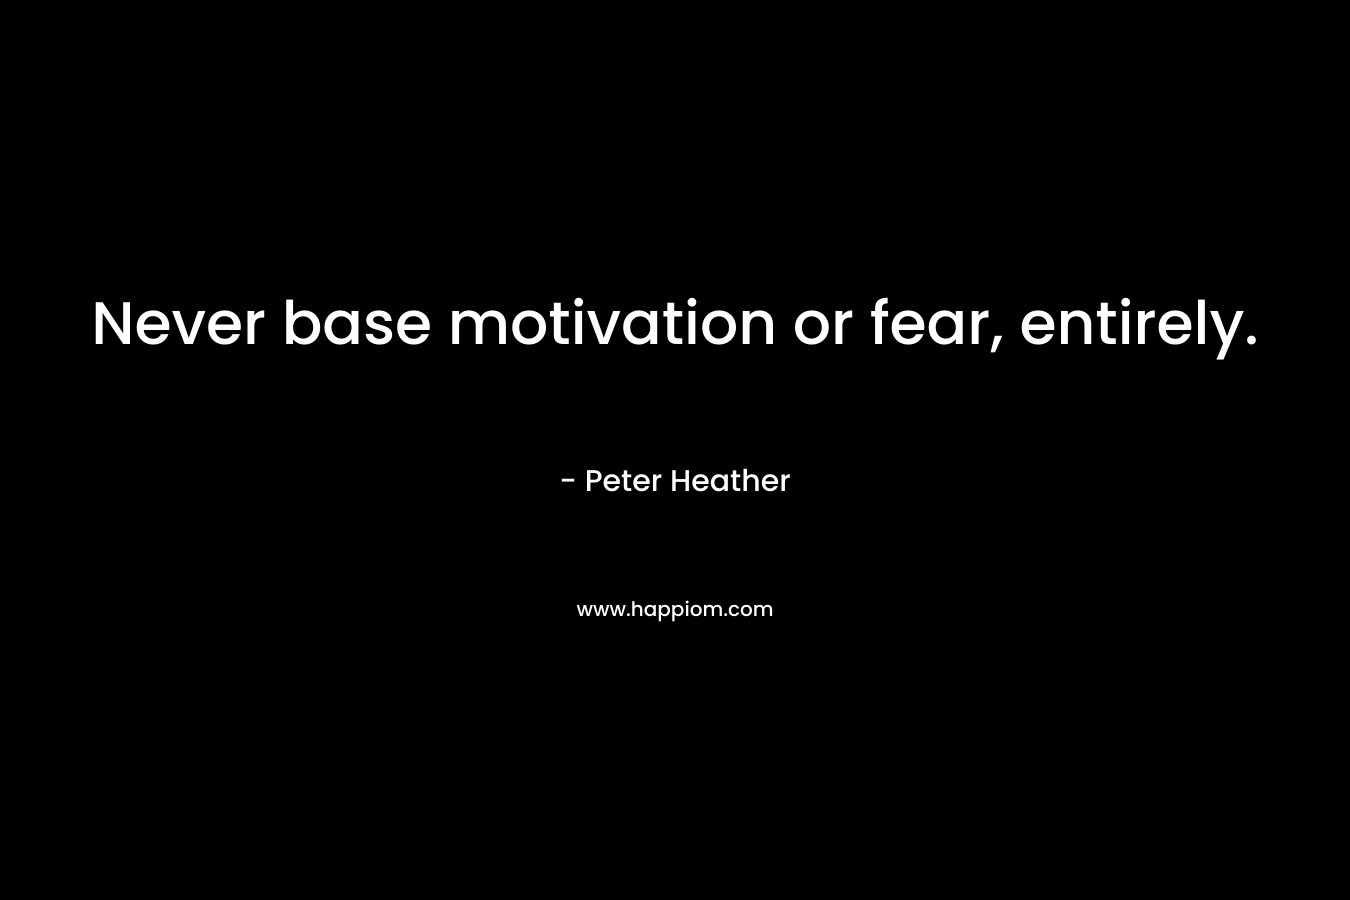 Never base motivation or fear, entirely. – Peter Heather